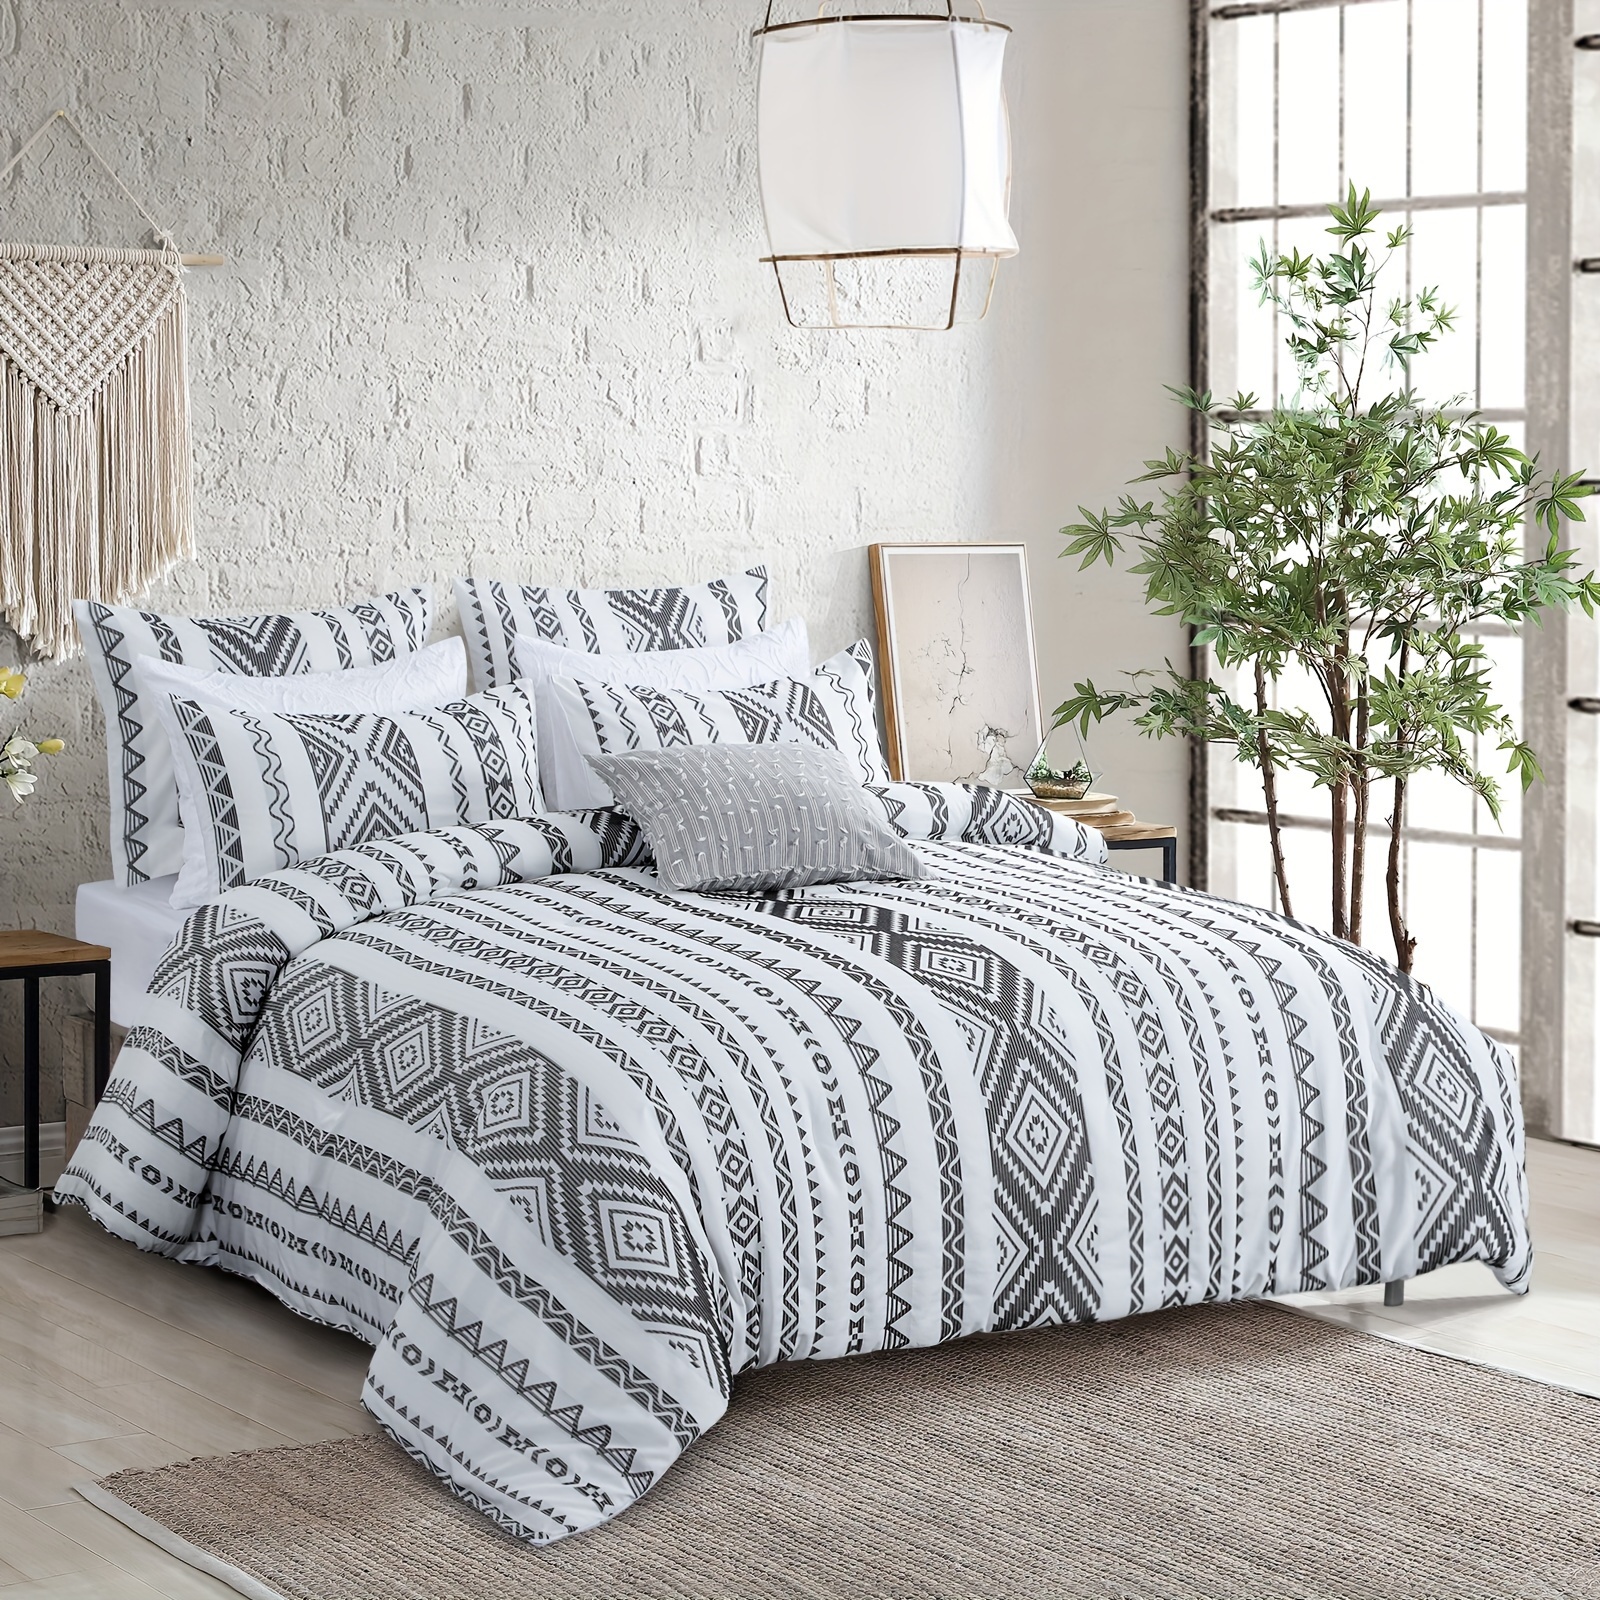 

2/3pcs Aztec Jacquard Luxury Bedding Comforter Set, Soft & Lightweight For All Seasons, Hypoallergenic Down Alternative, Hotel-quality Thick Duvet With Corner Tabs, Machine Washable